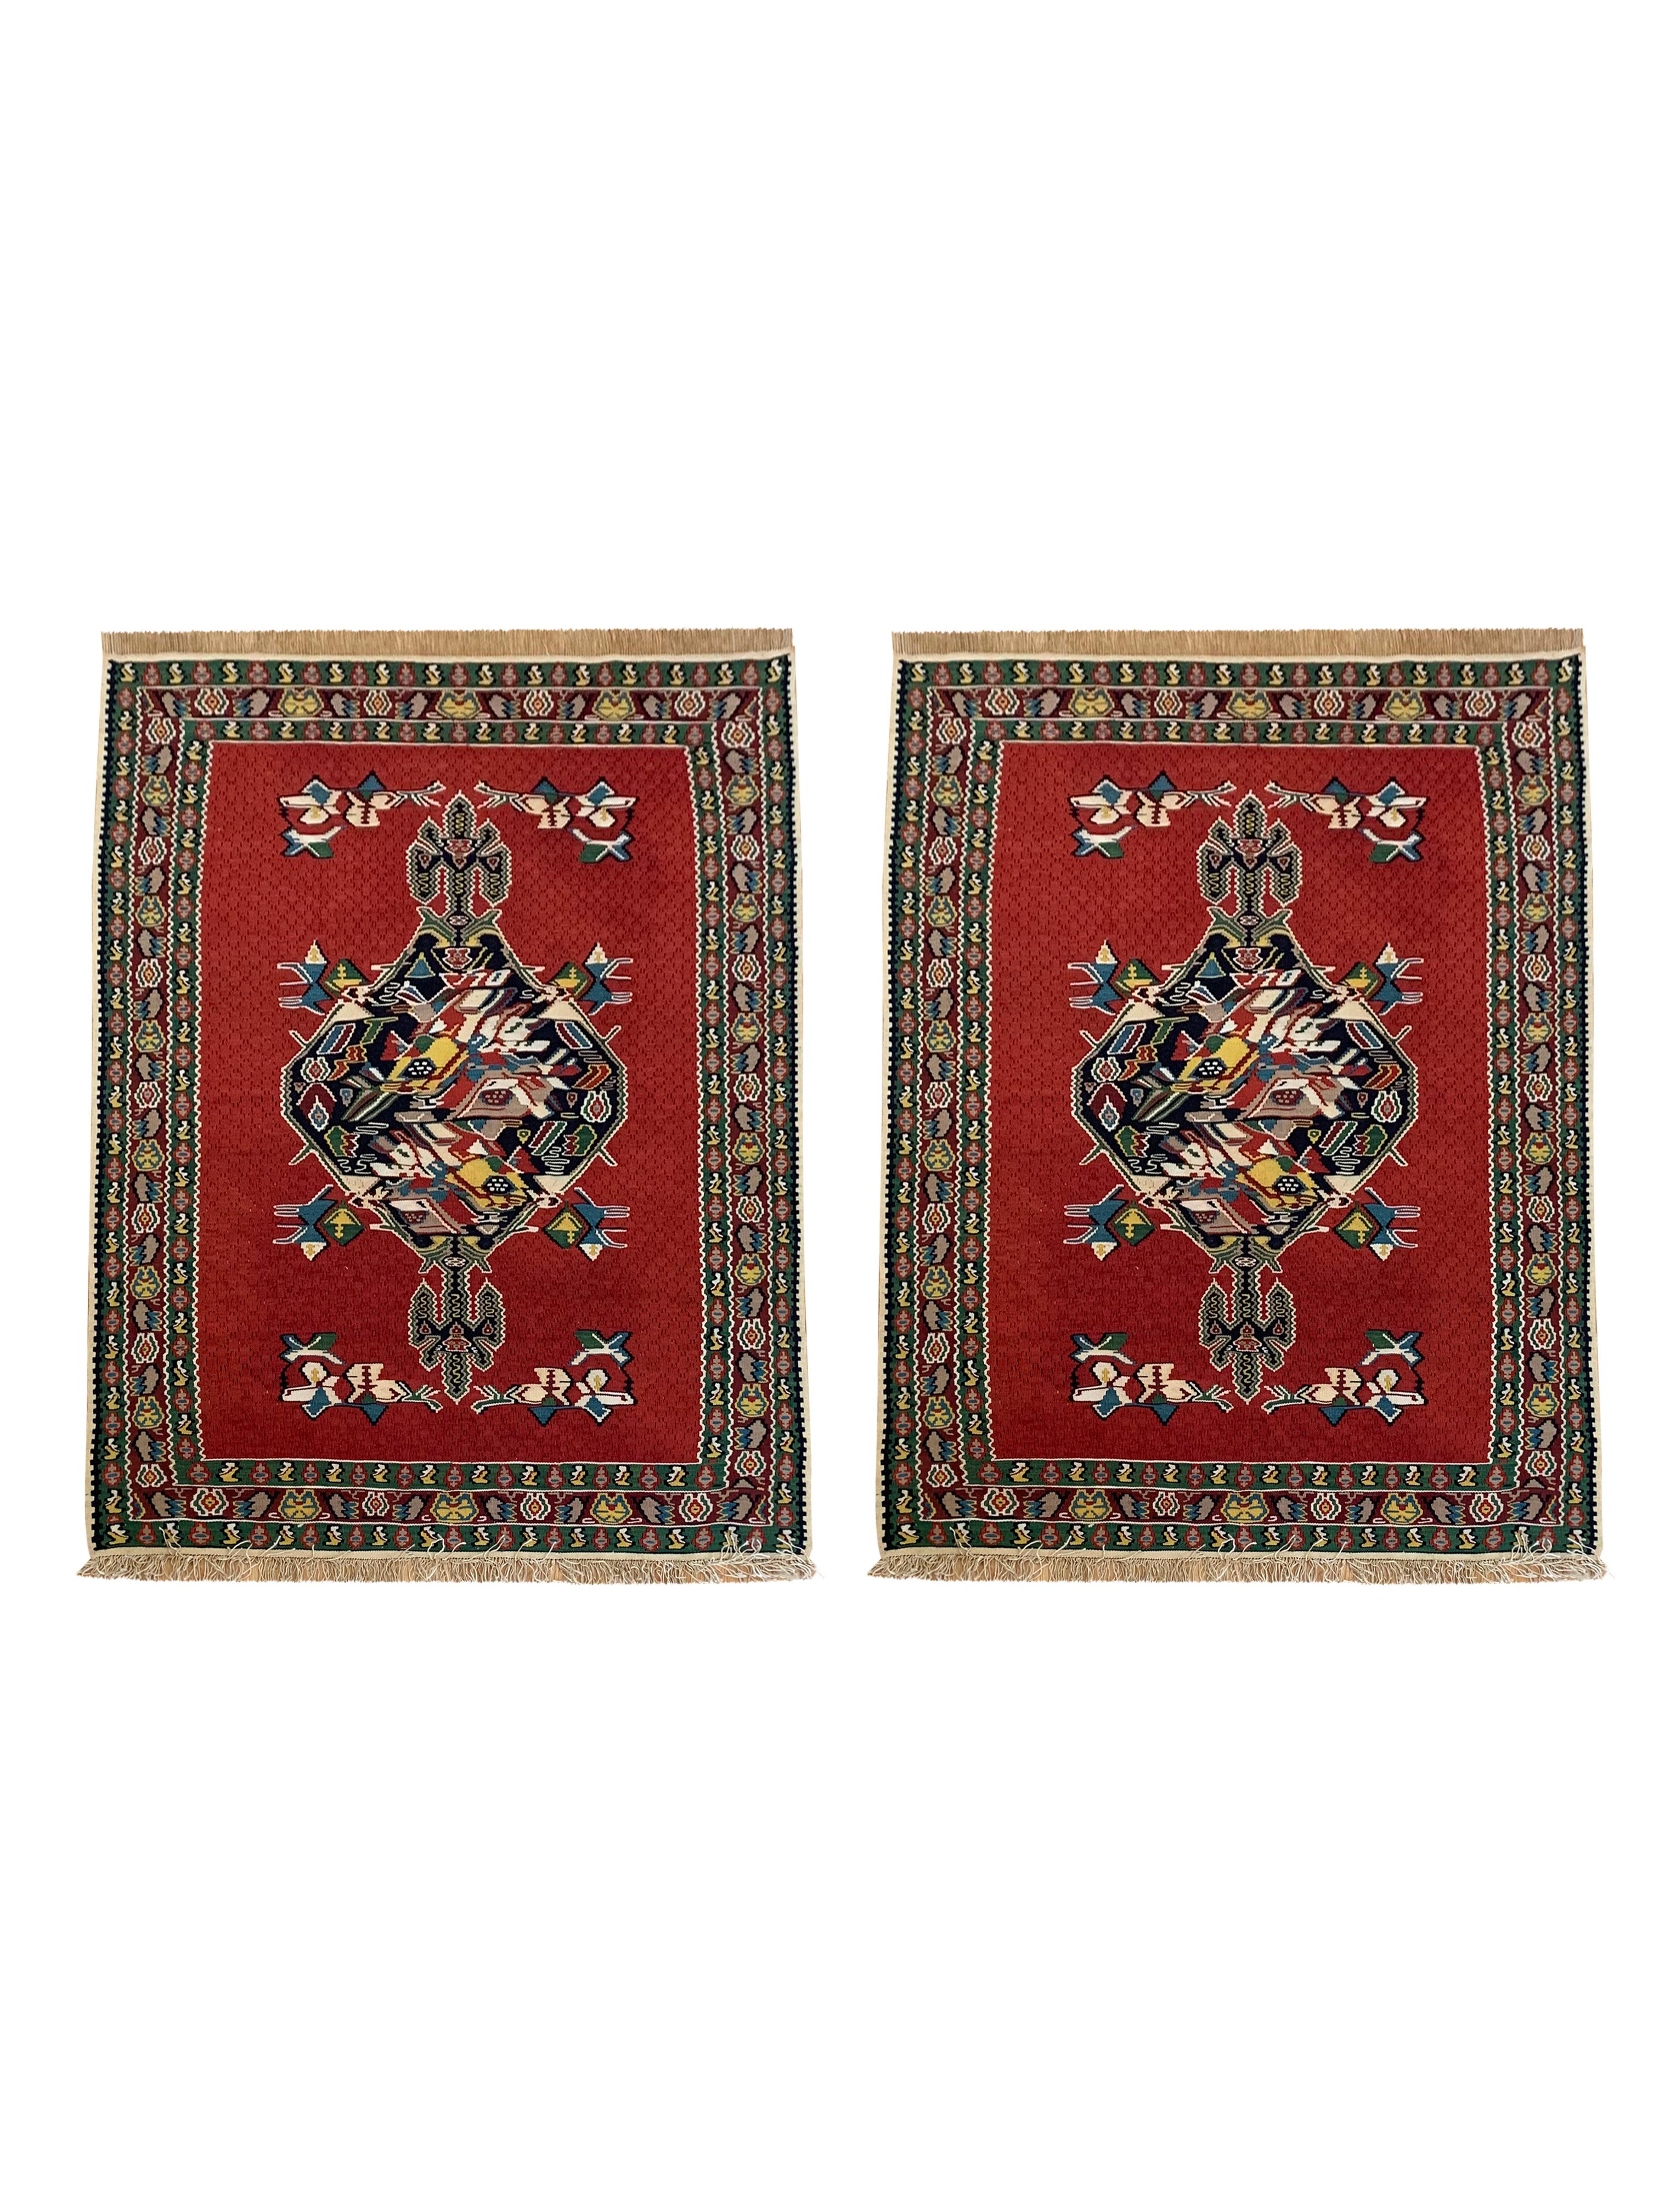 Pair of Red Silk and Wool Kilim Rugs Handmade Geometric Area Rugs For Sale 10